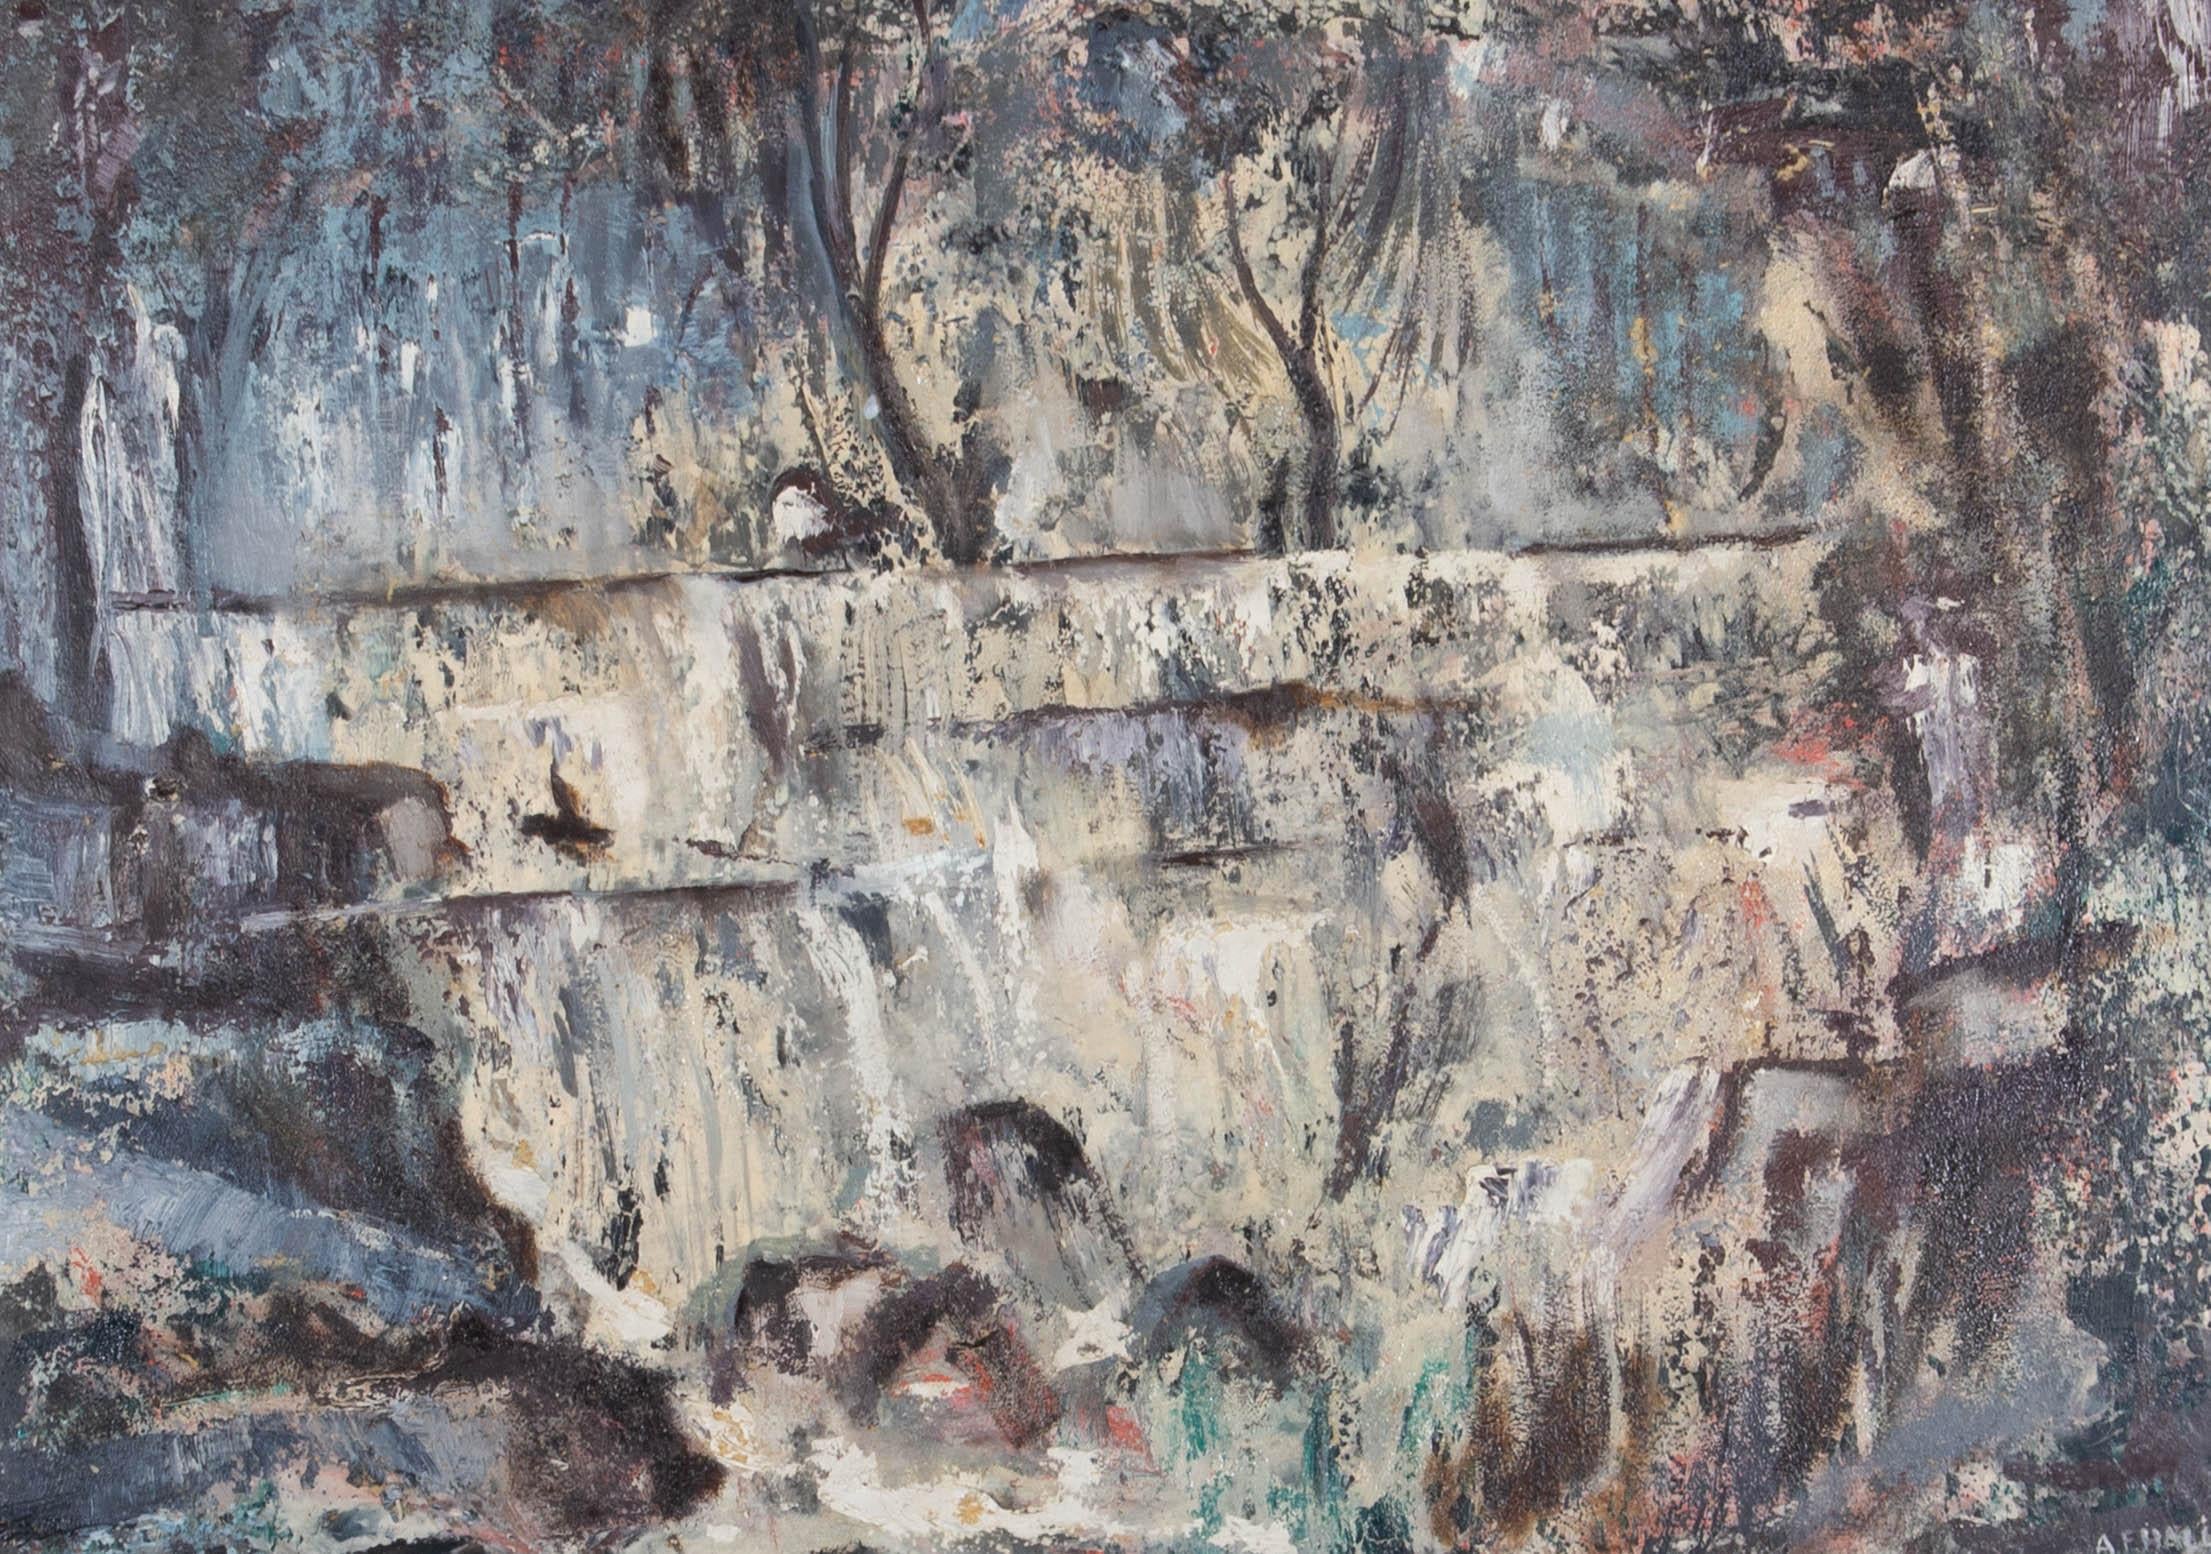 A.F. Hall - 20th Century Oil, Waterfall 4